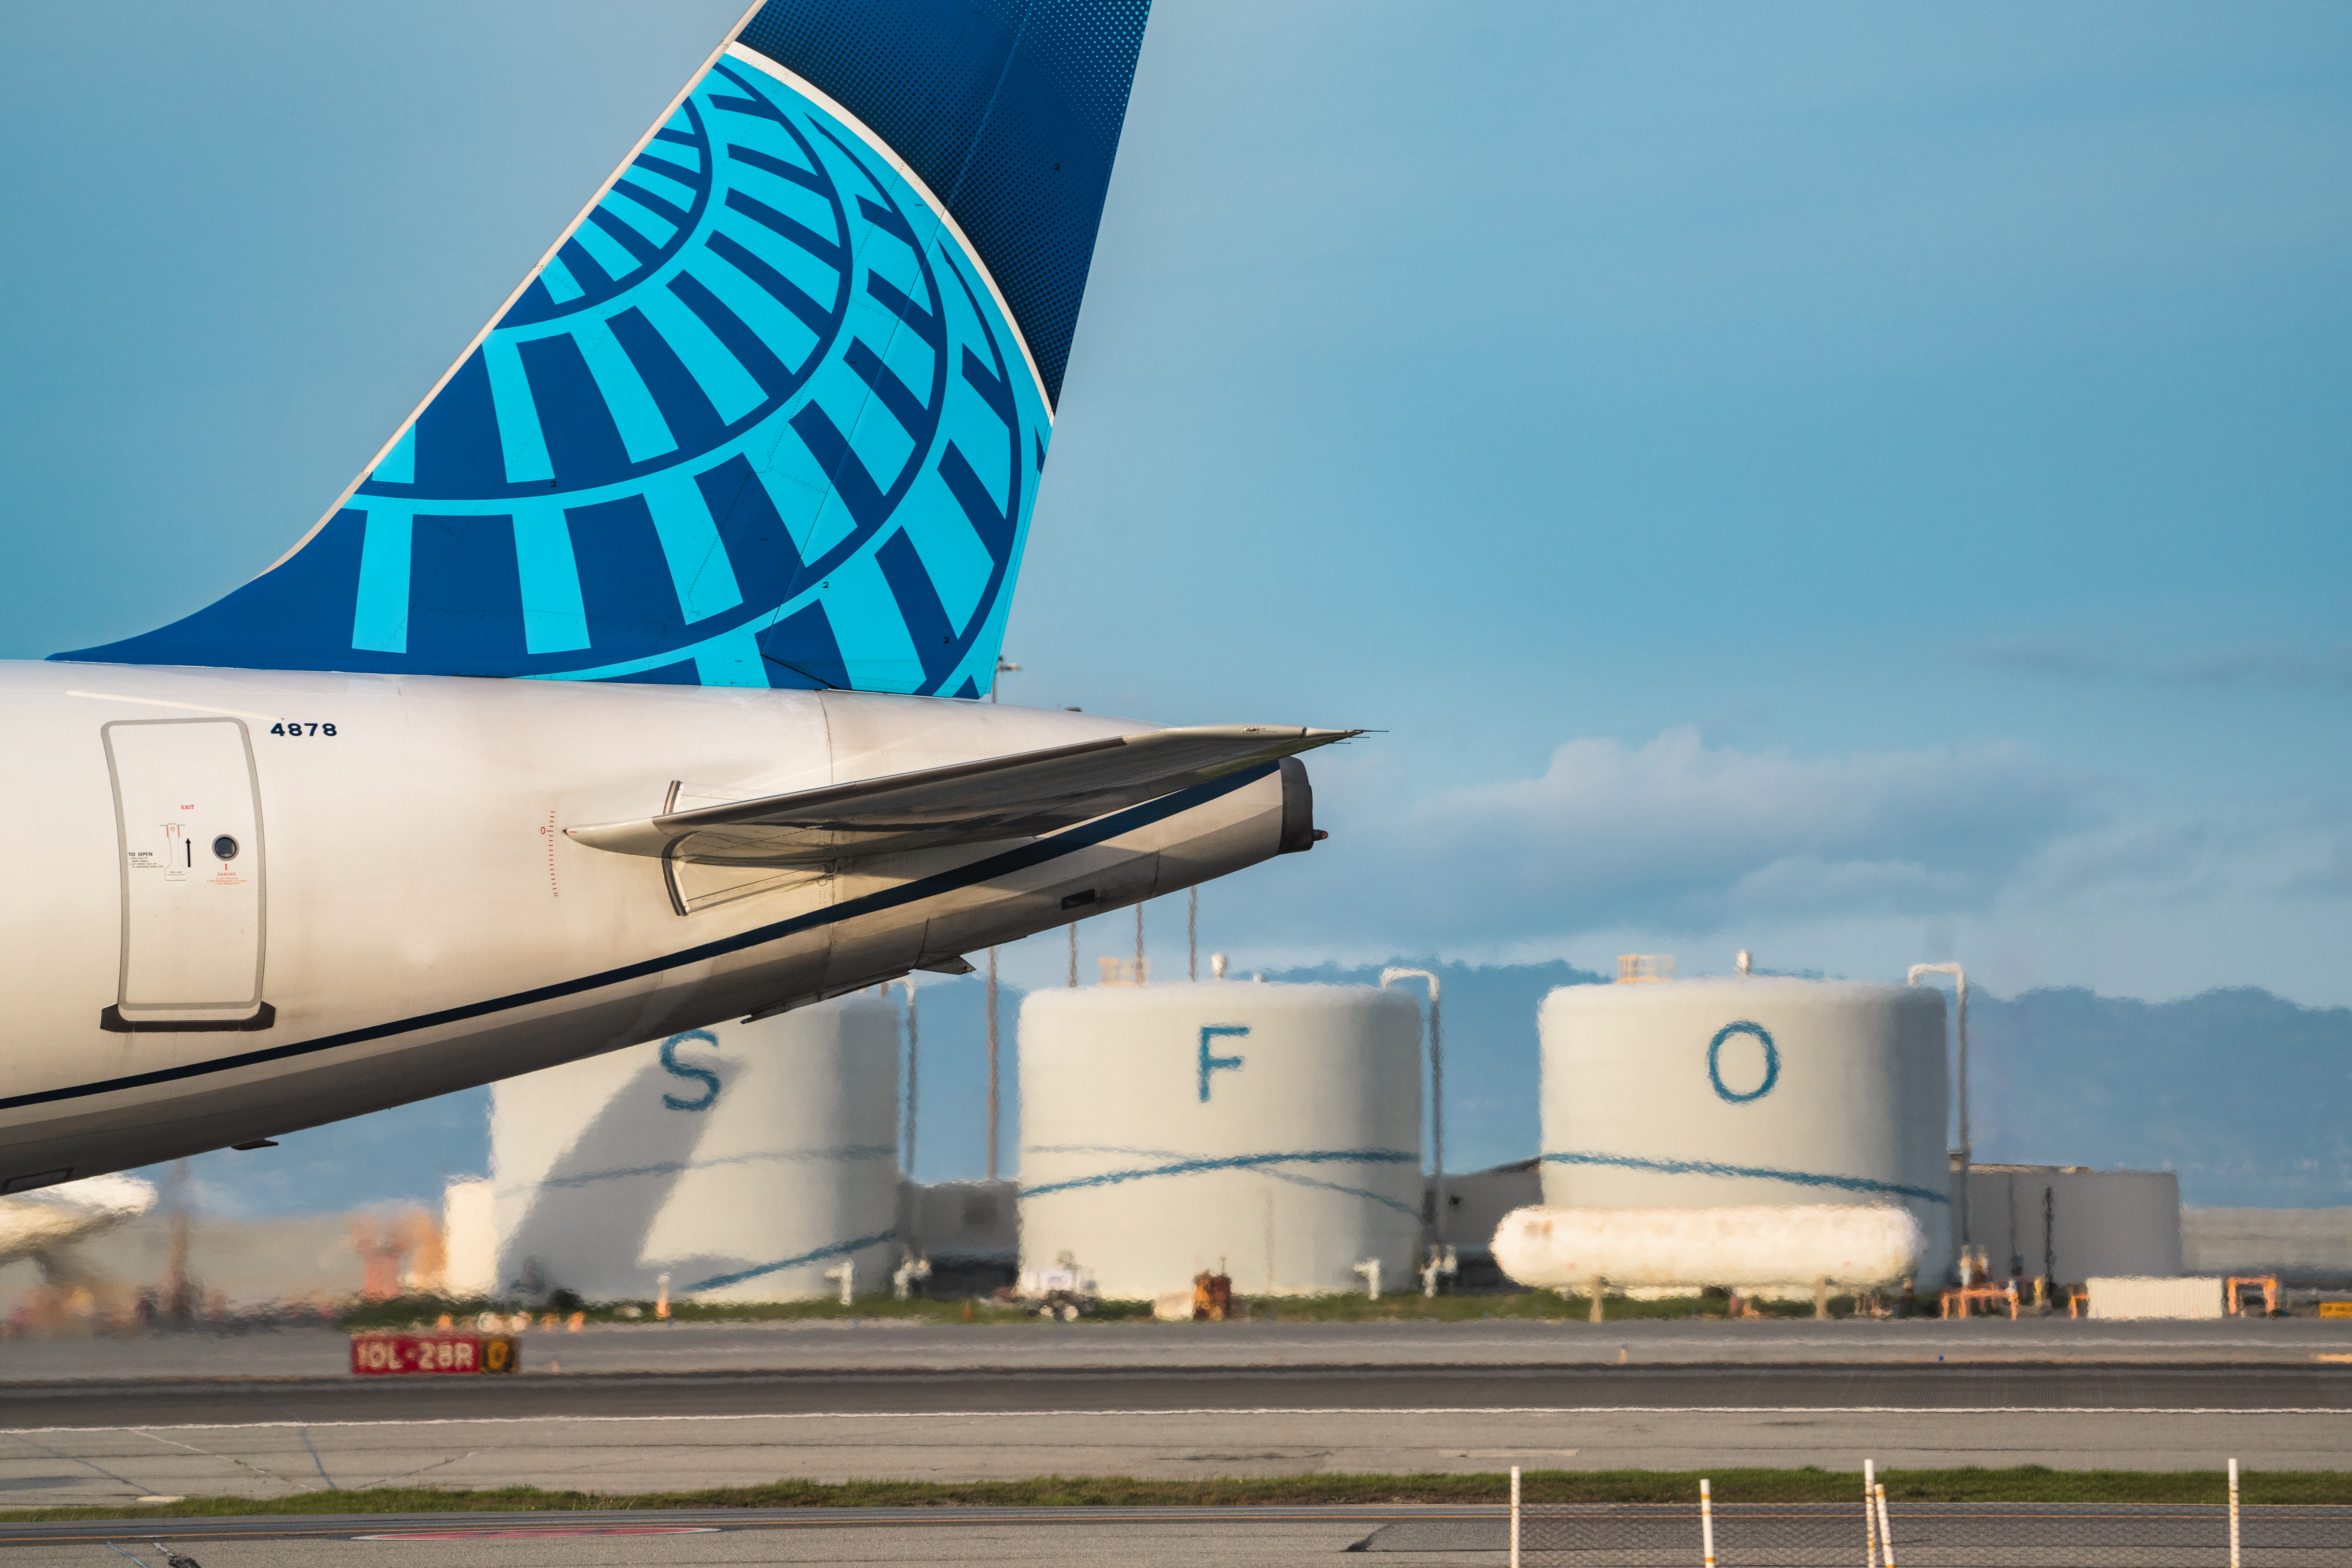 United plan to use 10 million gallons of sustainable aviation fuel in 2023